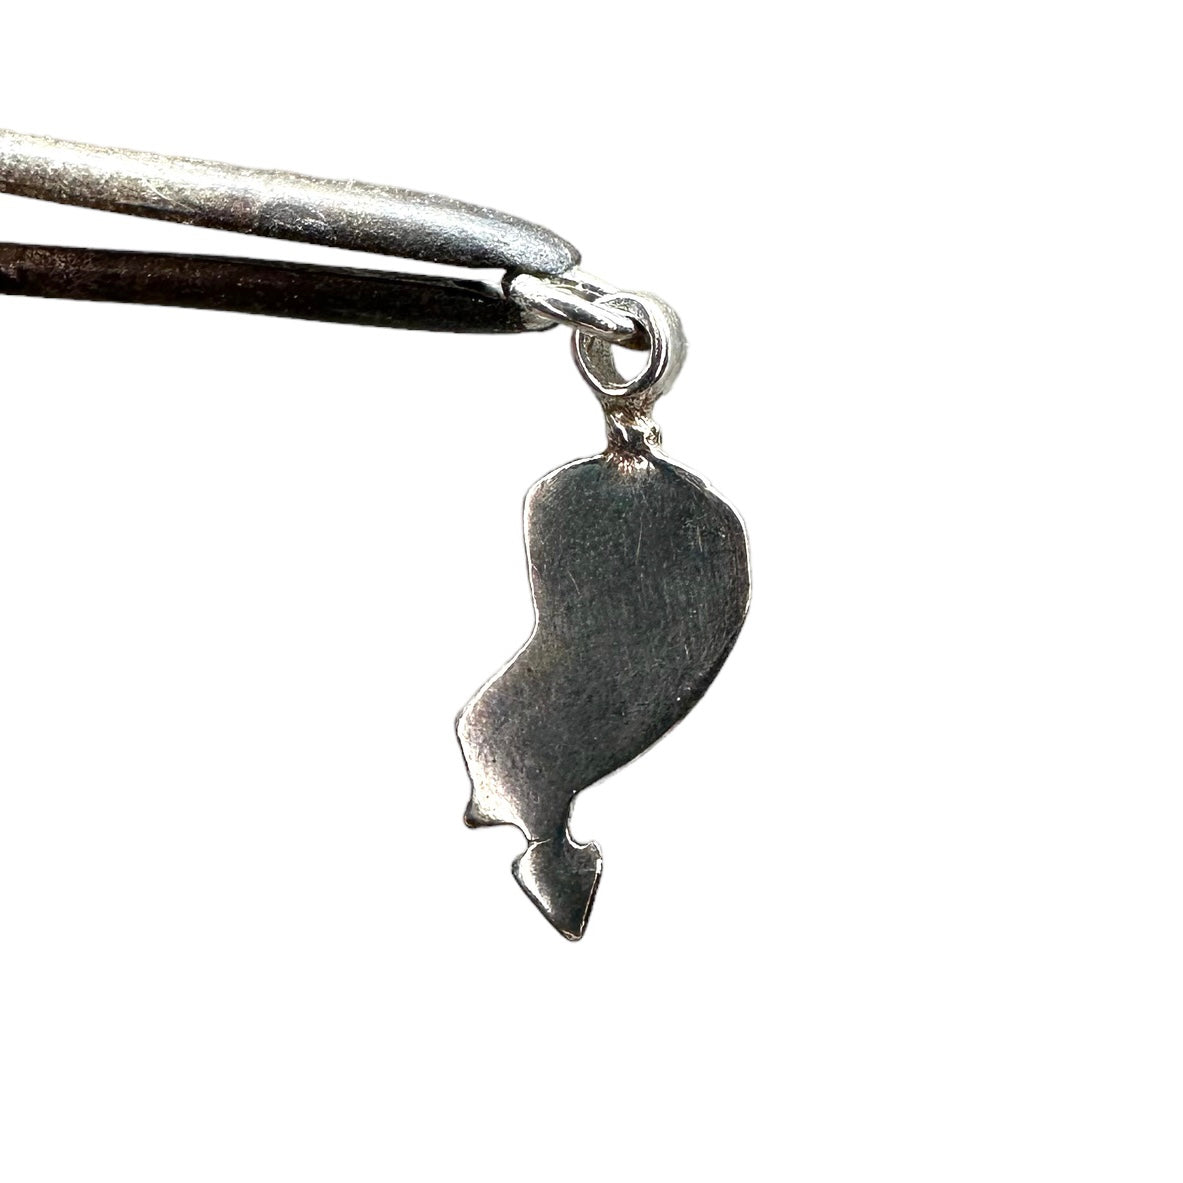 Between friend halves of heart (charm for necklace)